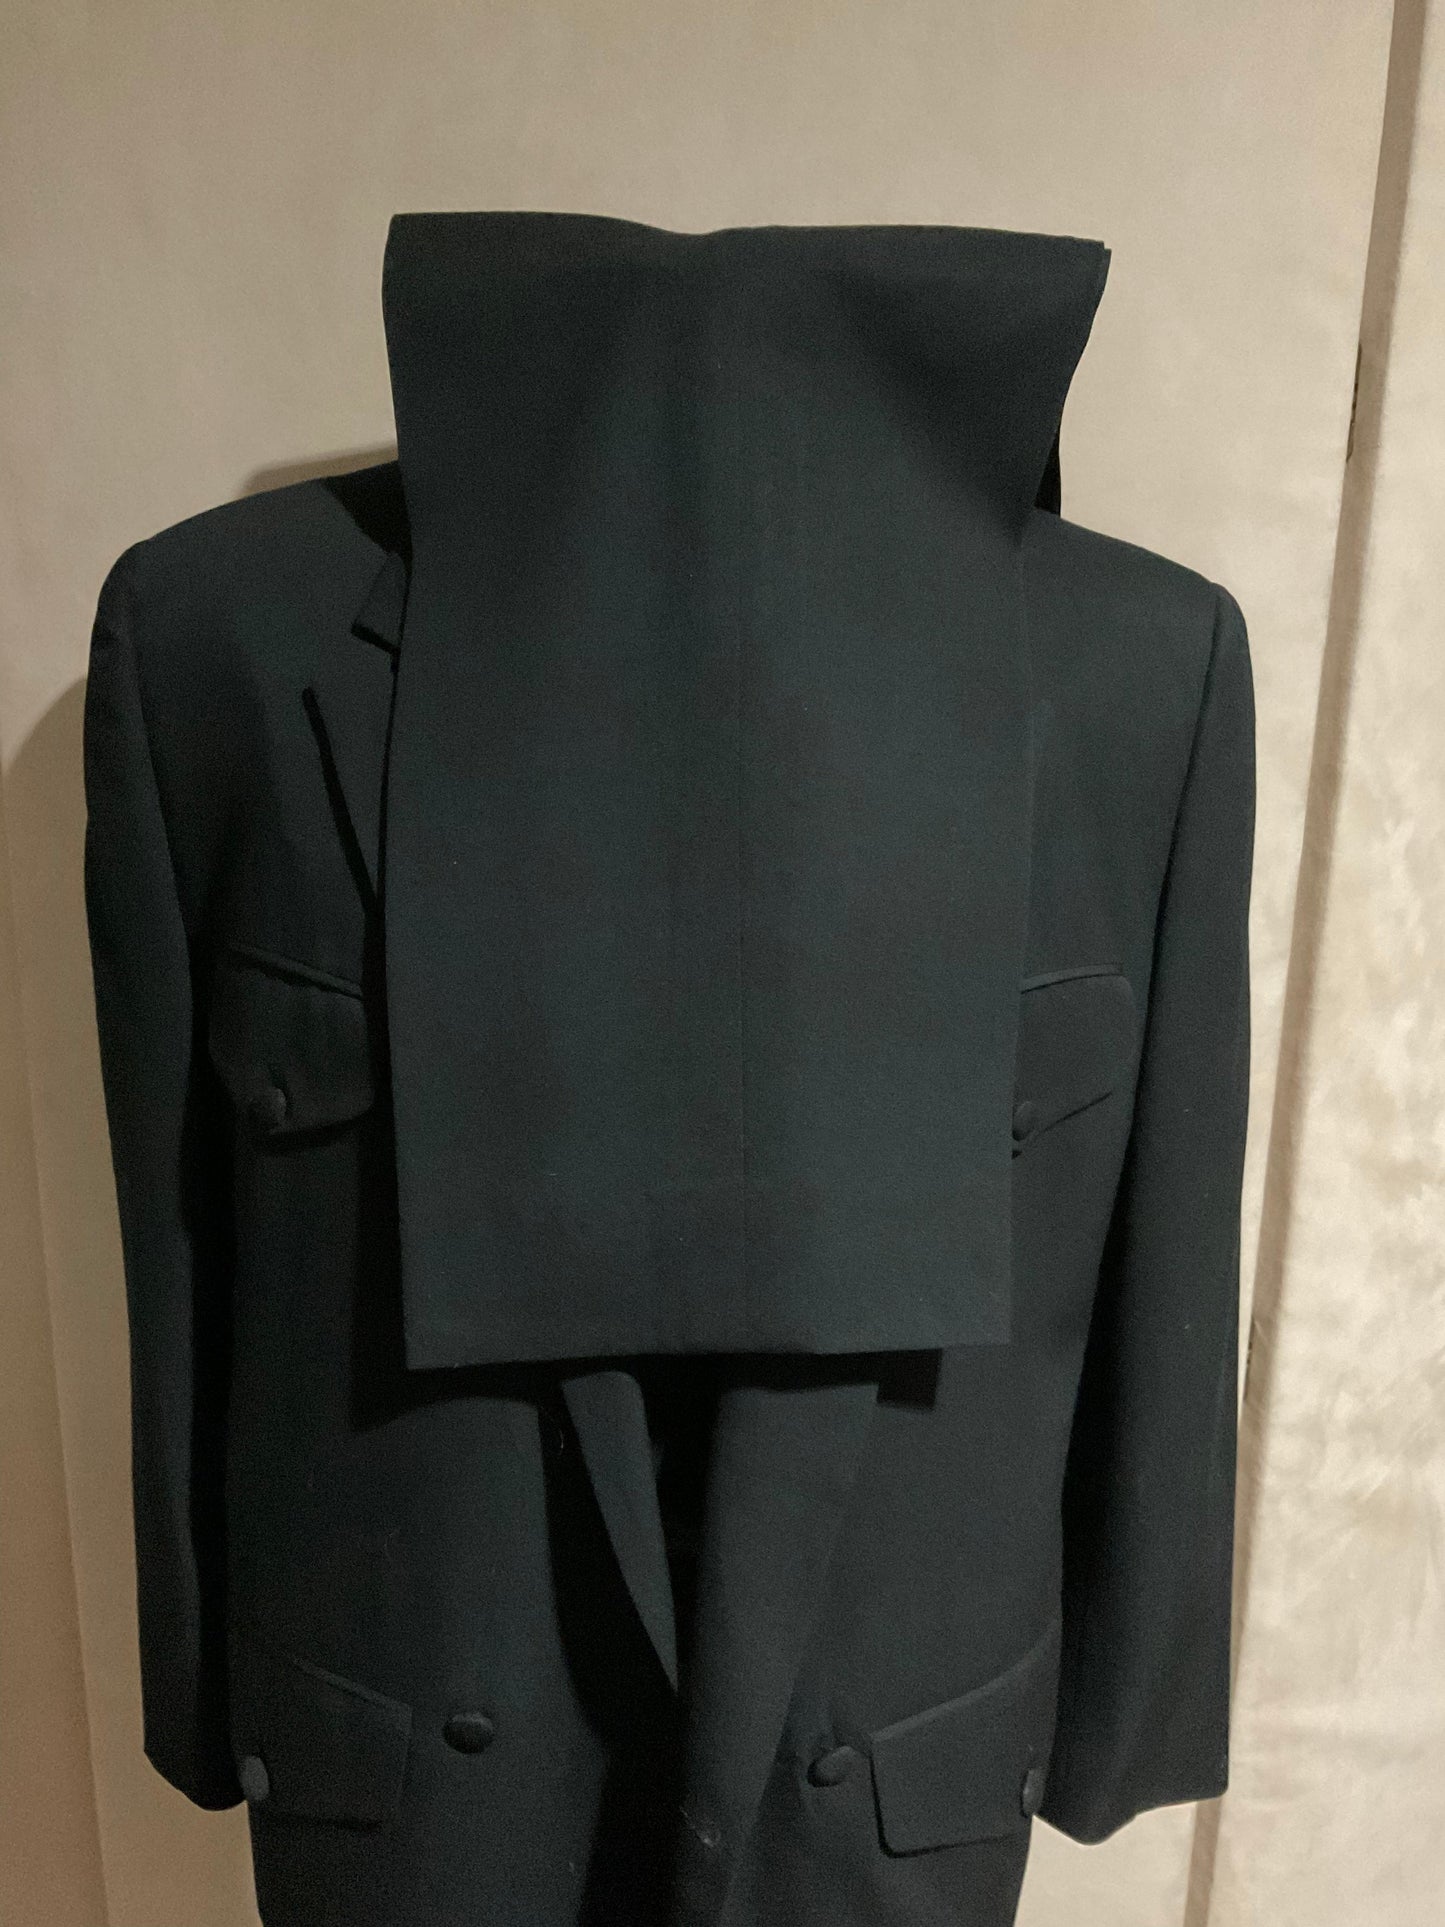 R P SUIT / CUSTOM BESPOKE DESIGN / DOUBLE BREASTED 4 POCKETS / BLACK / 40  REG / CRAFTED IN USA